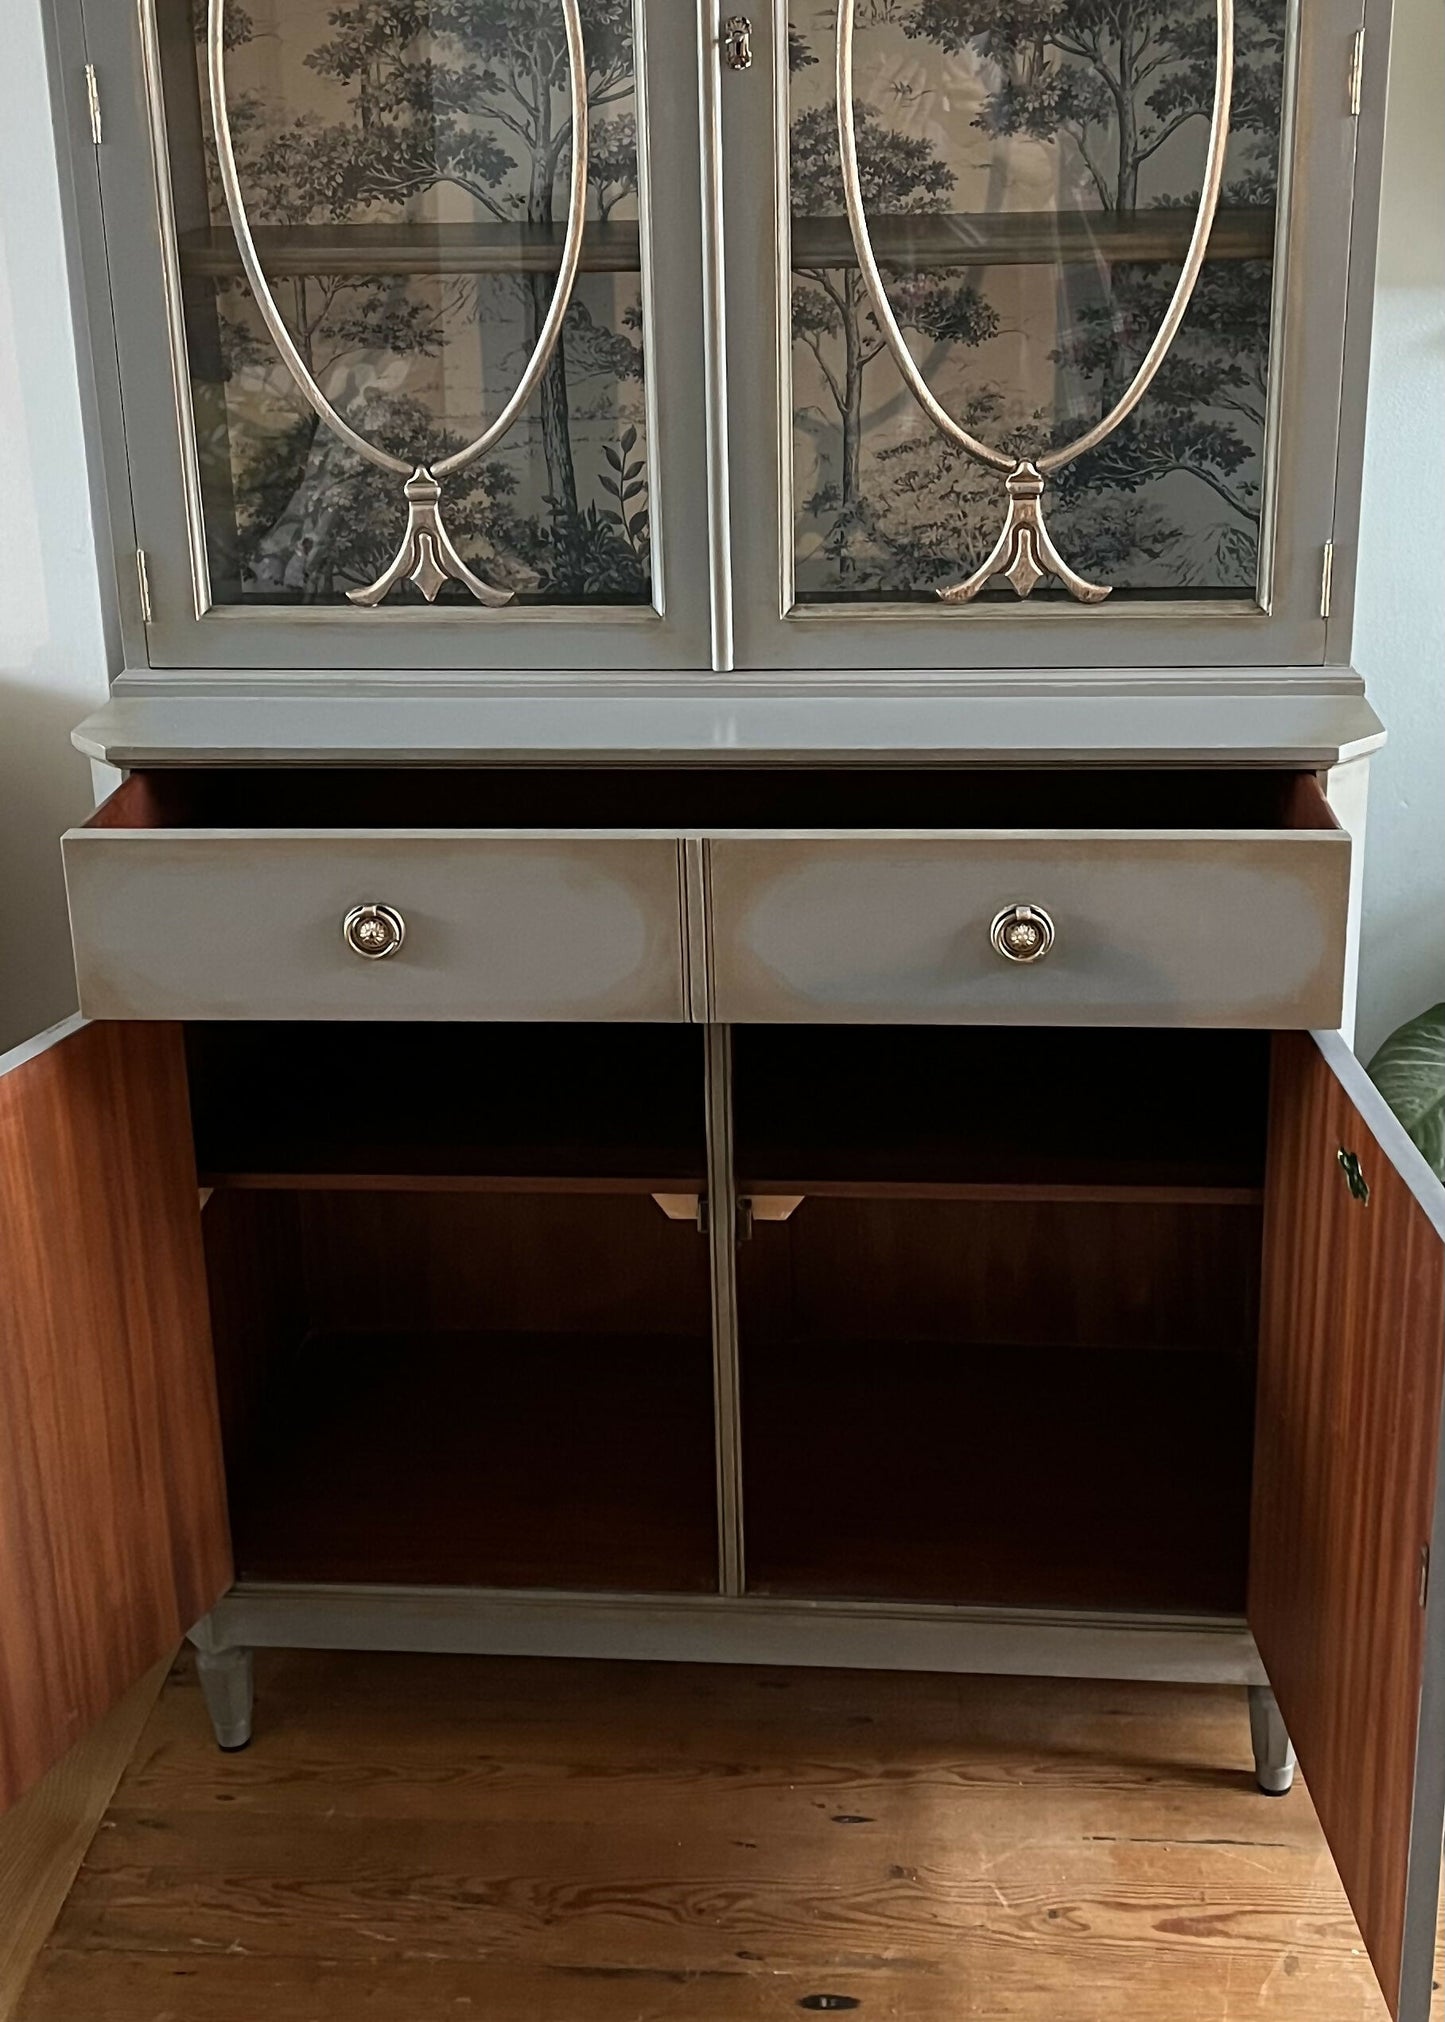 Sold - Vintage Strongbow Display cabinet.